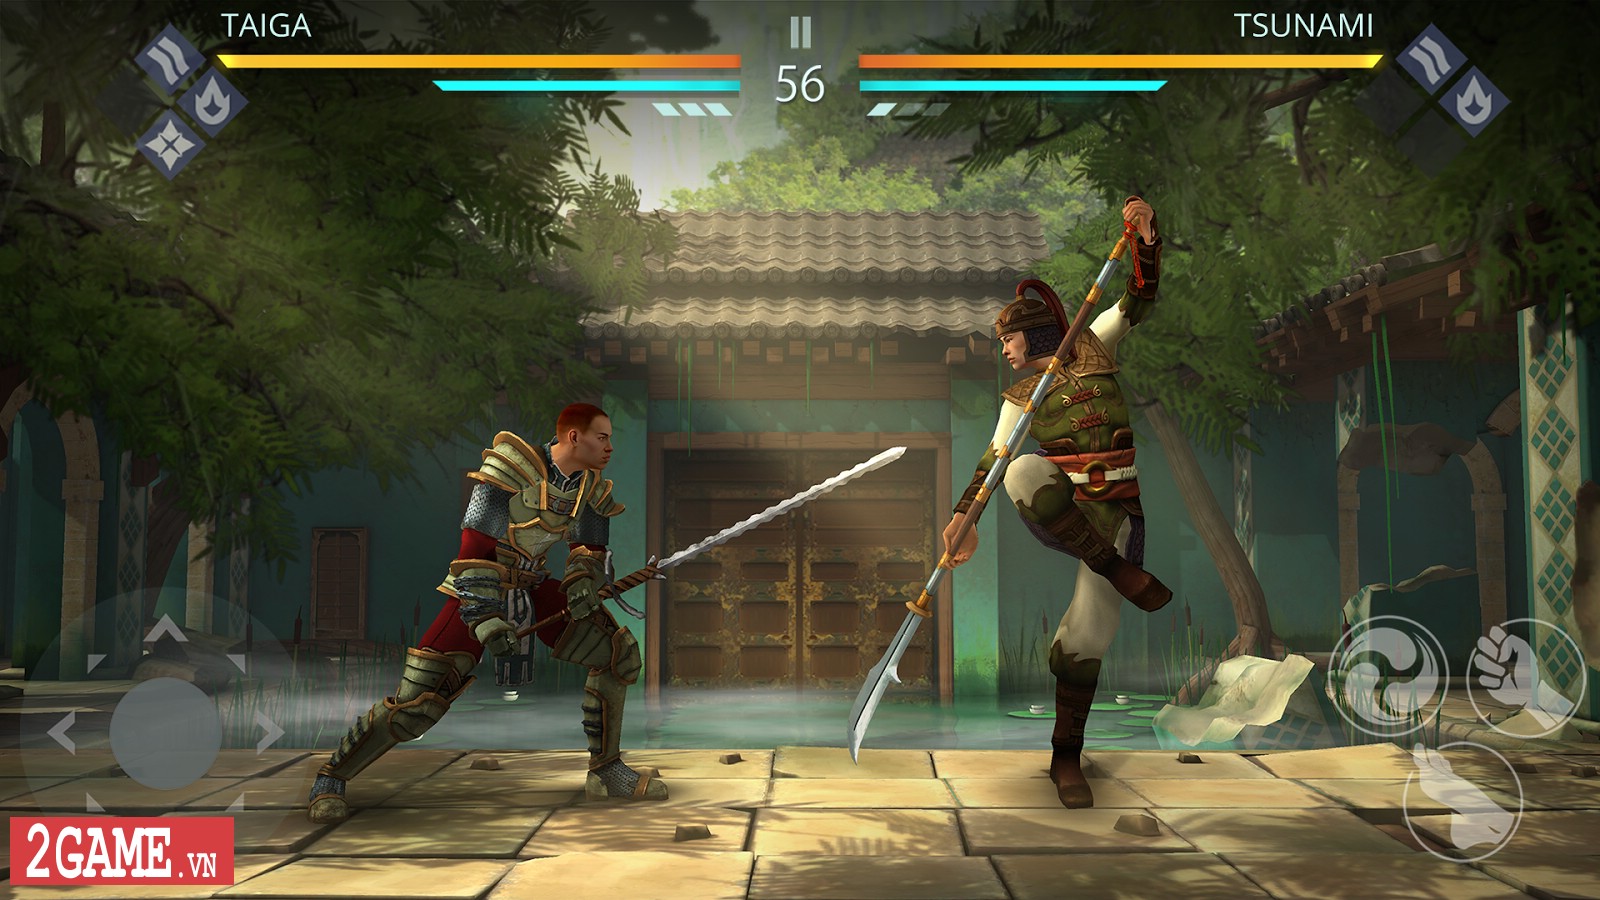 2game-Shadow-Fight-3-mobile-anh-hd.jpg (1600×900)